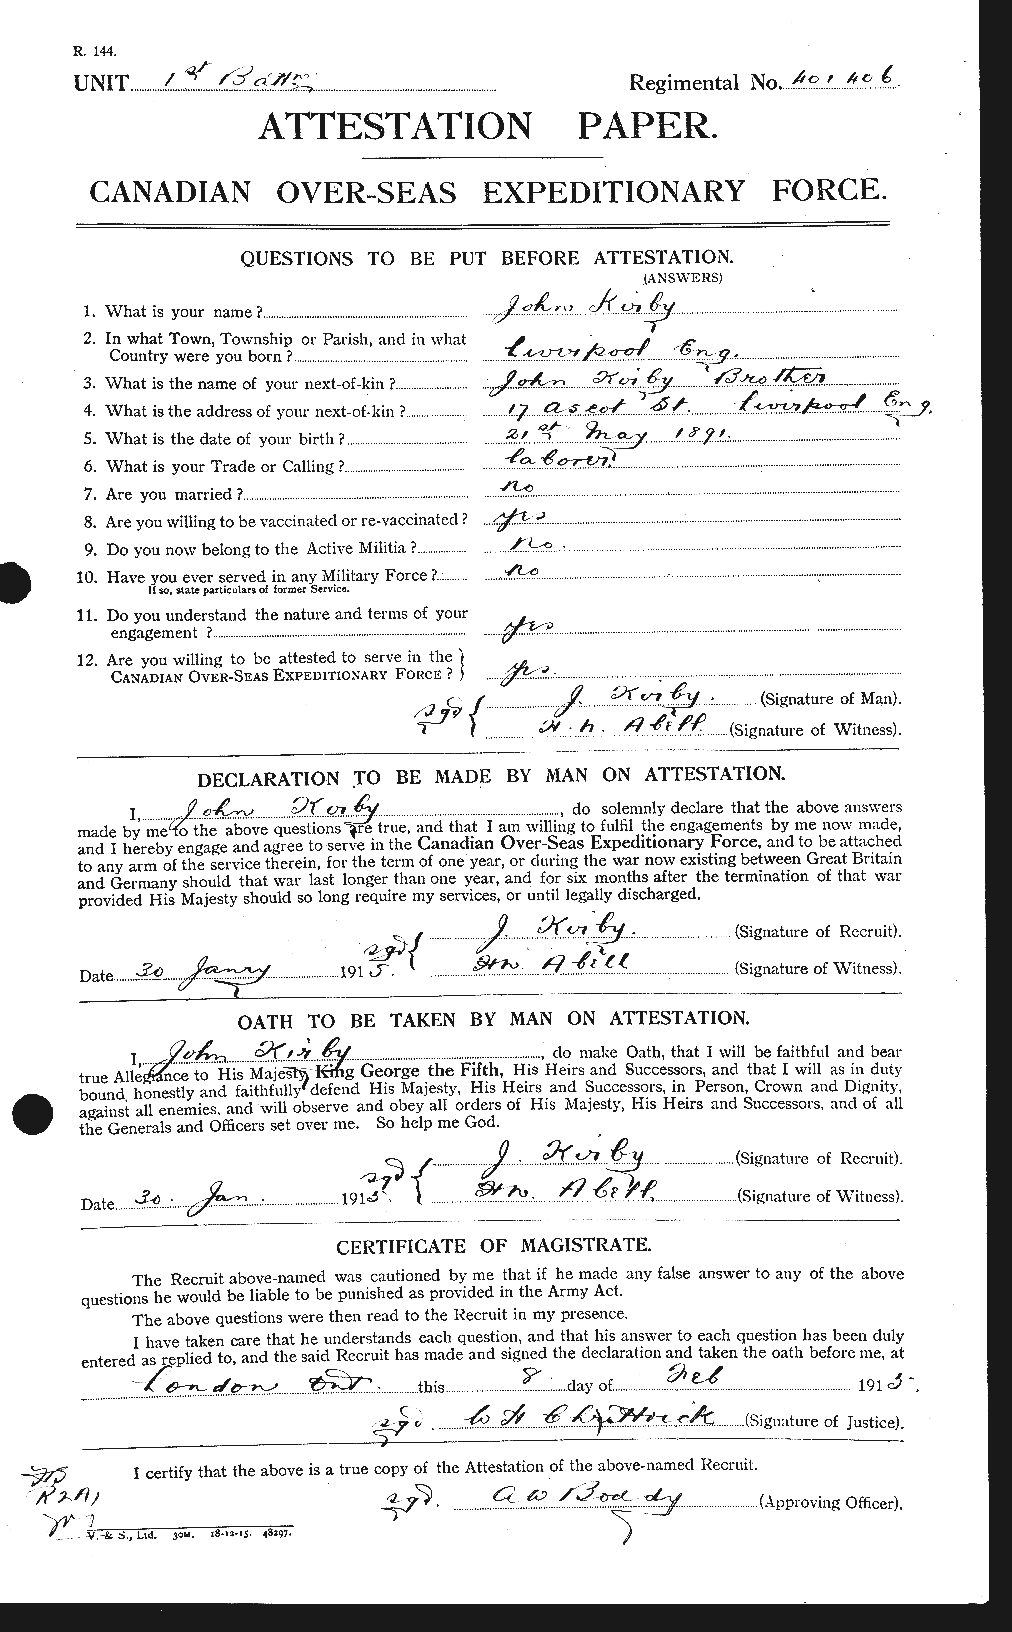 Personnel Records of the First World War - CEF 437225a